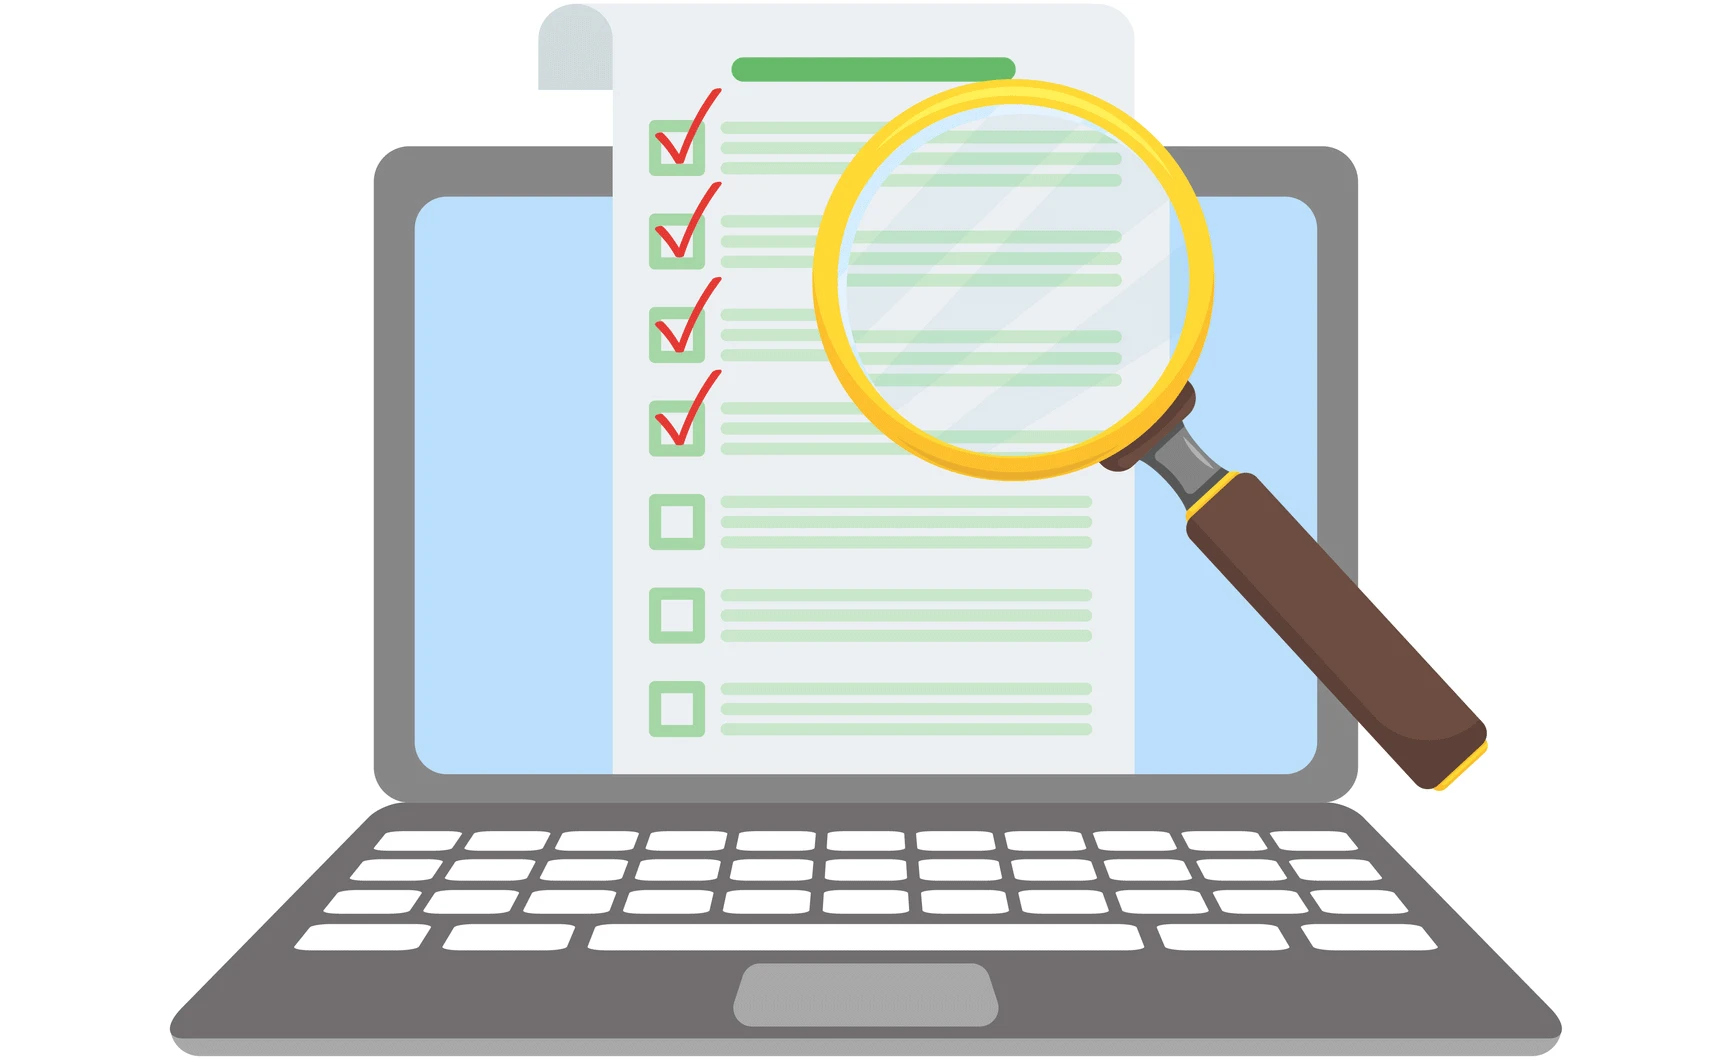 Illustration - Paper check list on laptop under magnifying glass